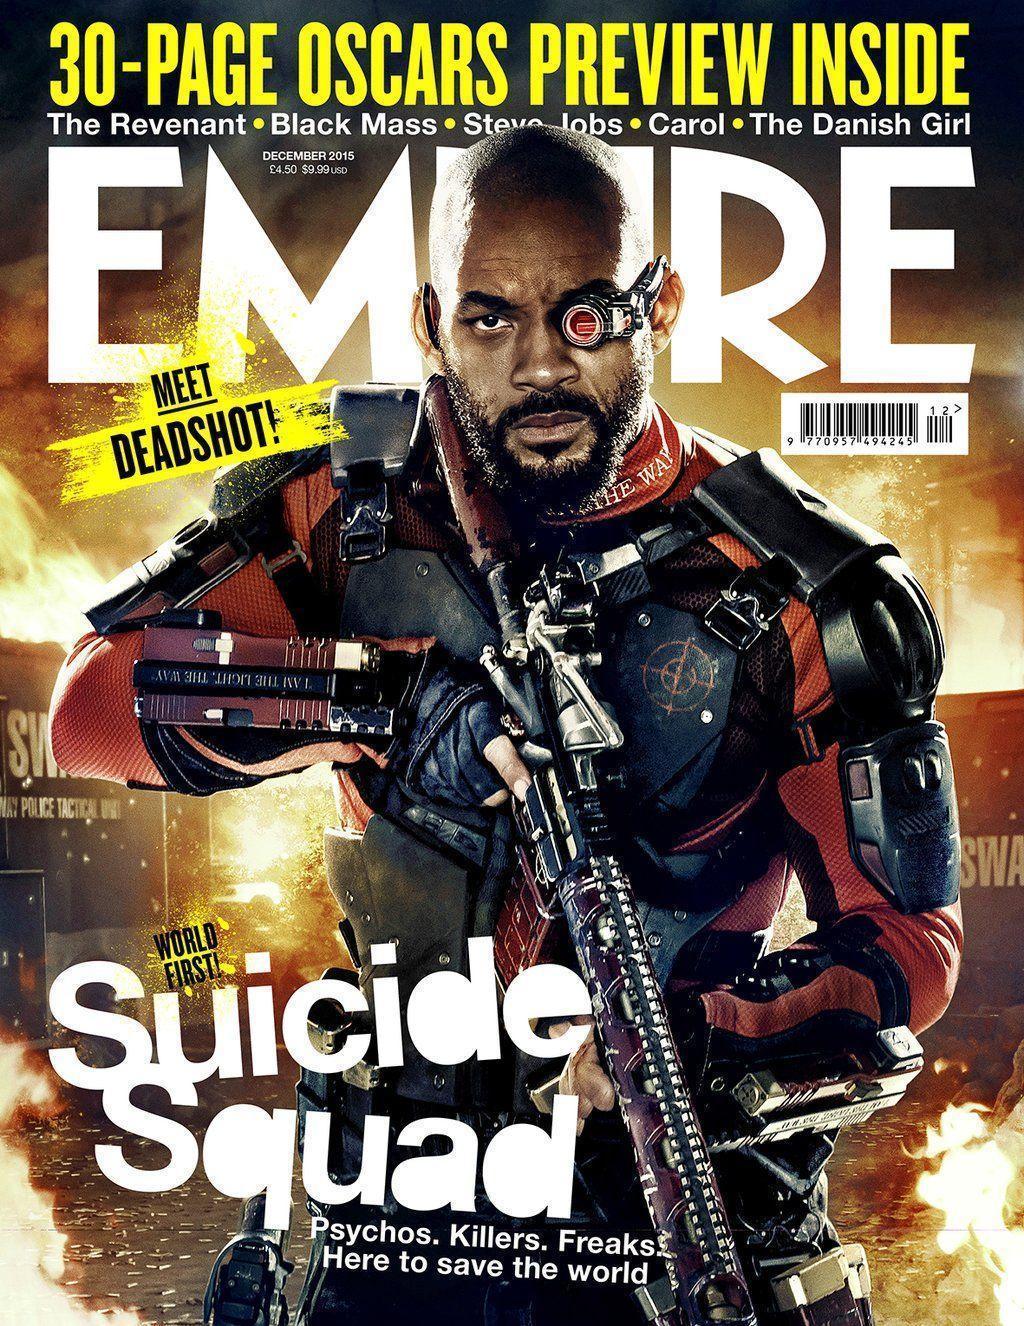 Suicide Squad Will Smith Deadshot wallpapers – wallpapers free download